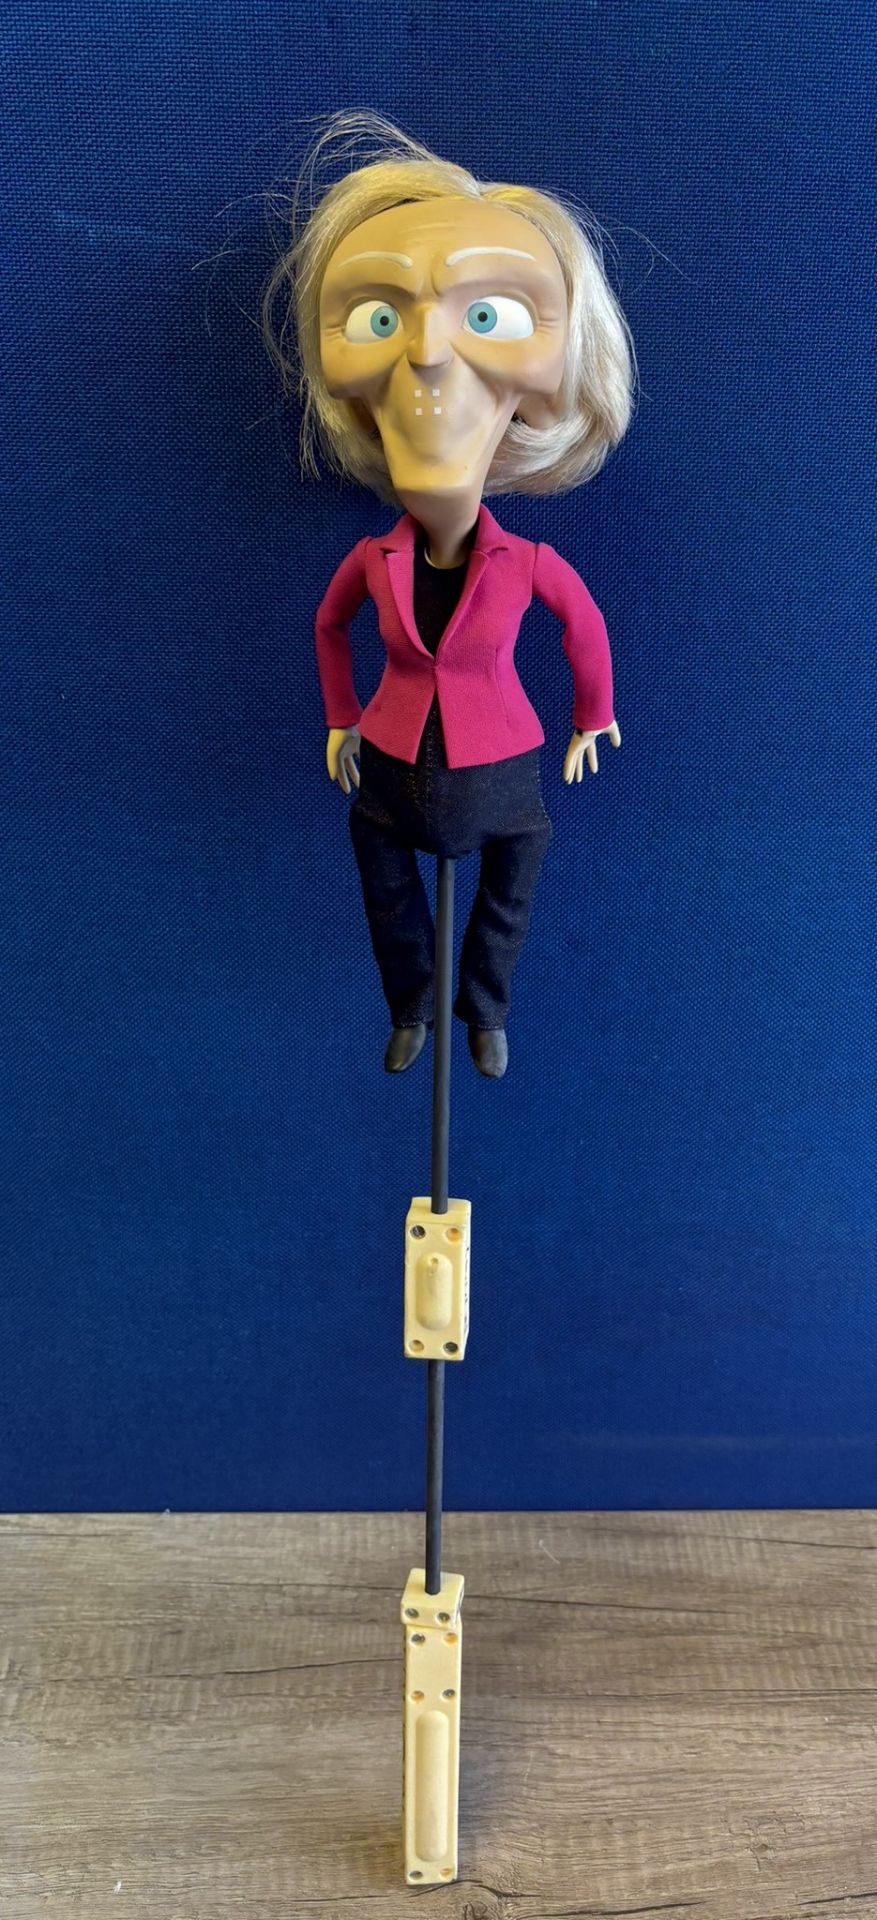 Newzoid puppet - Mary Berry - Image 3 of 3